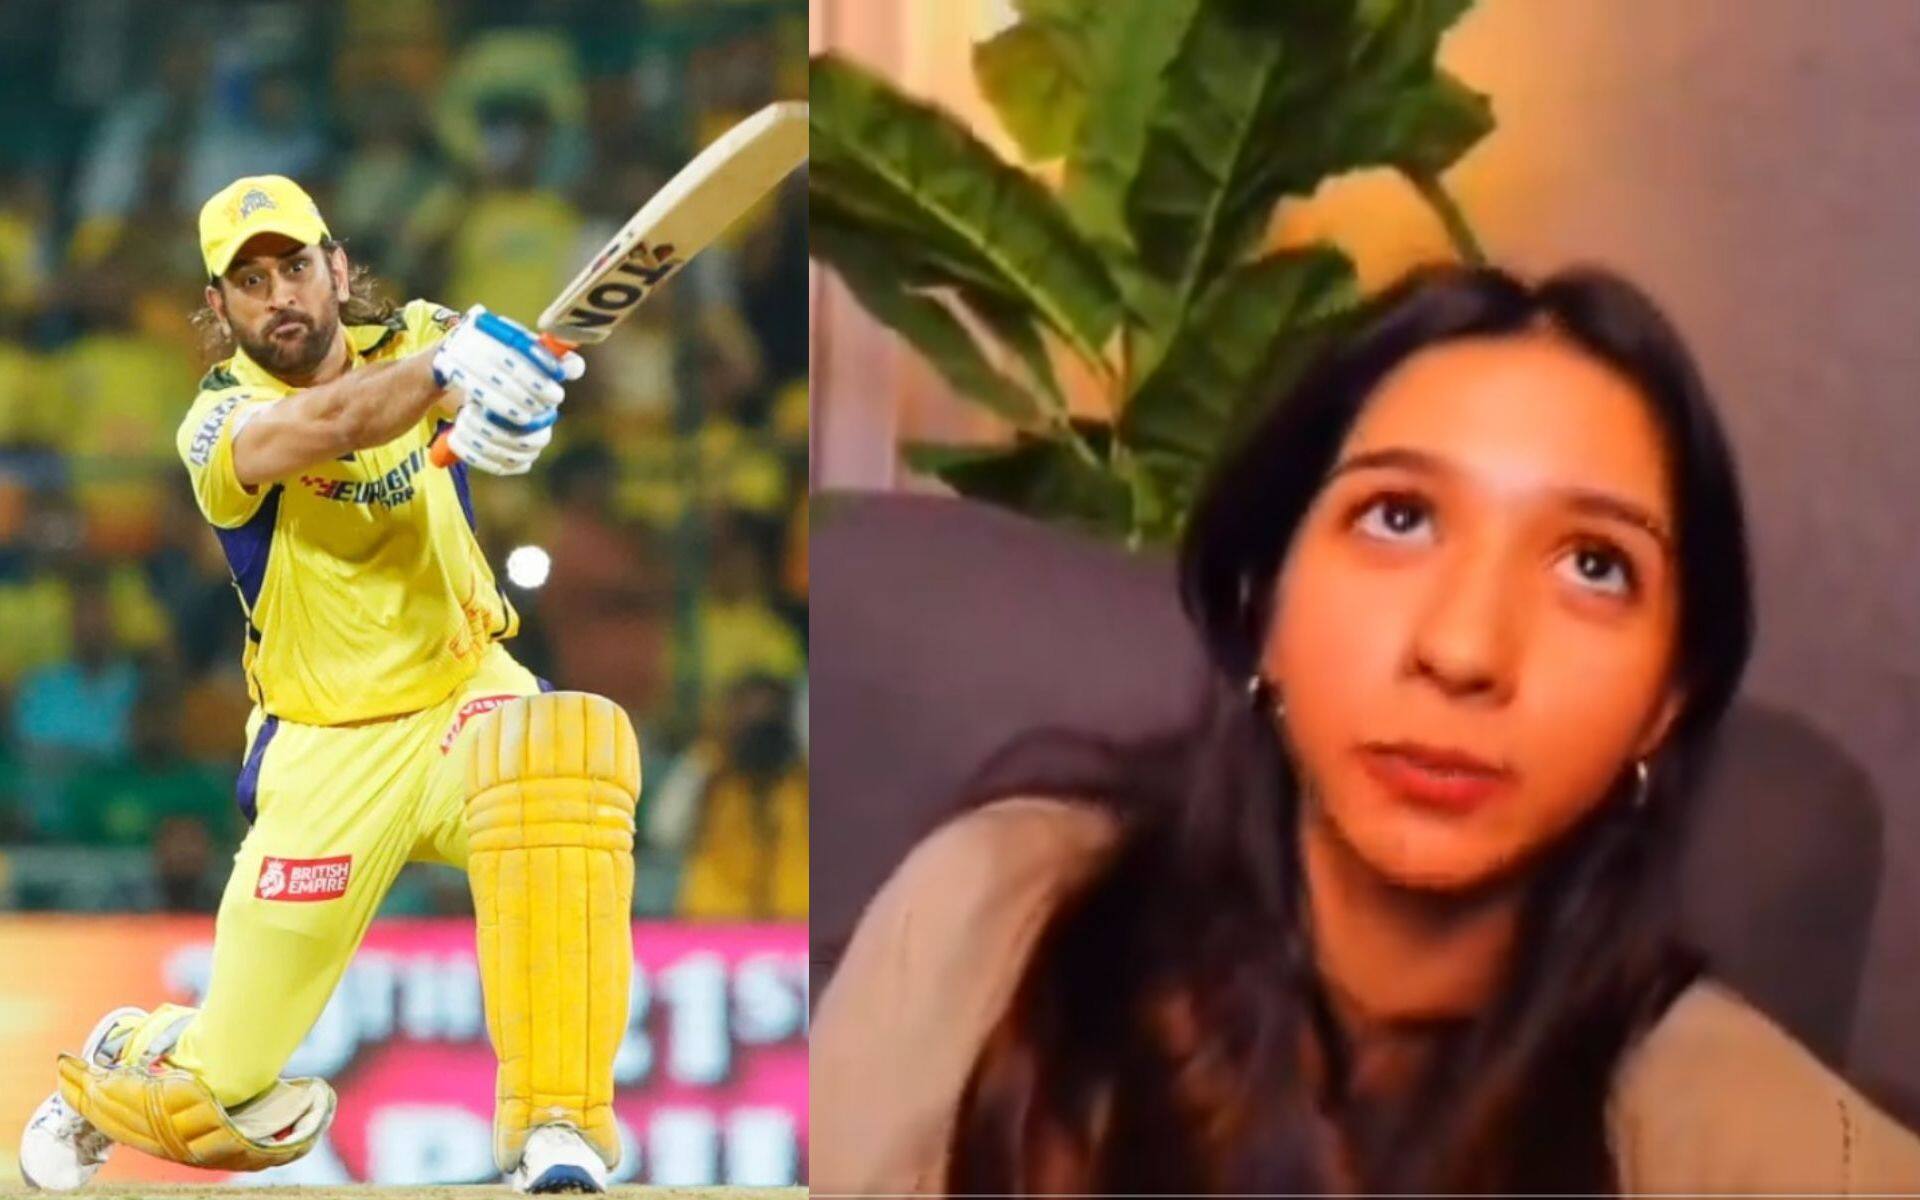 MS Dhoni's fangirl don't recognise fullform of MS in cricketer's initials